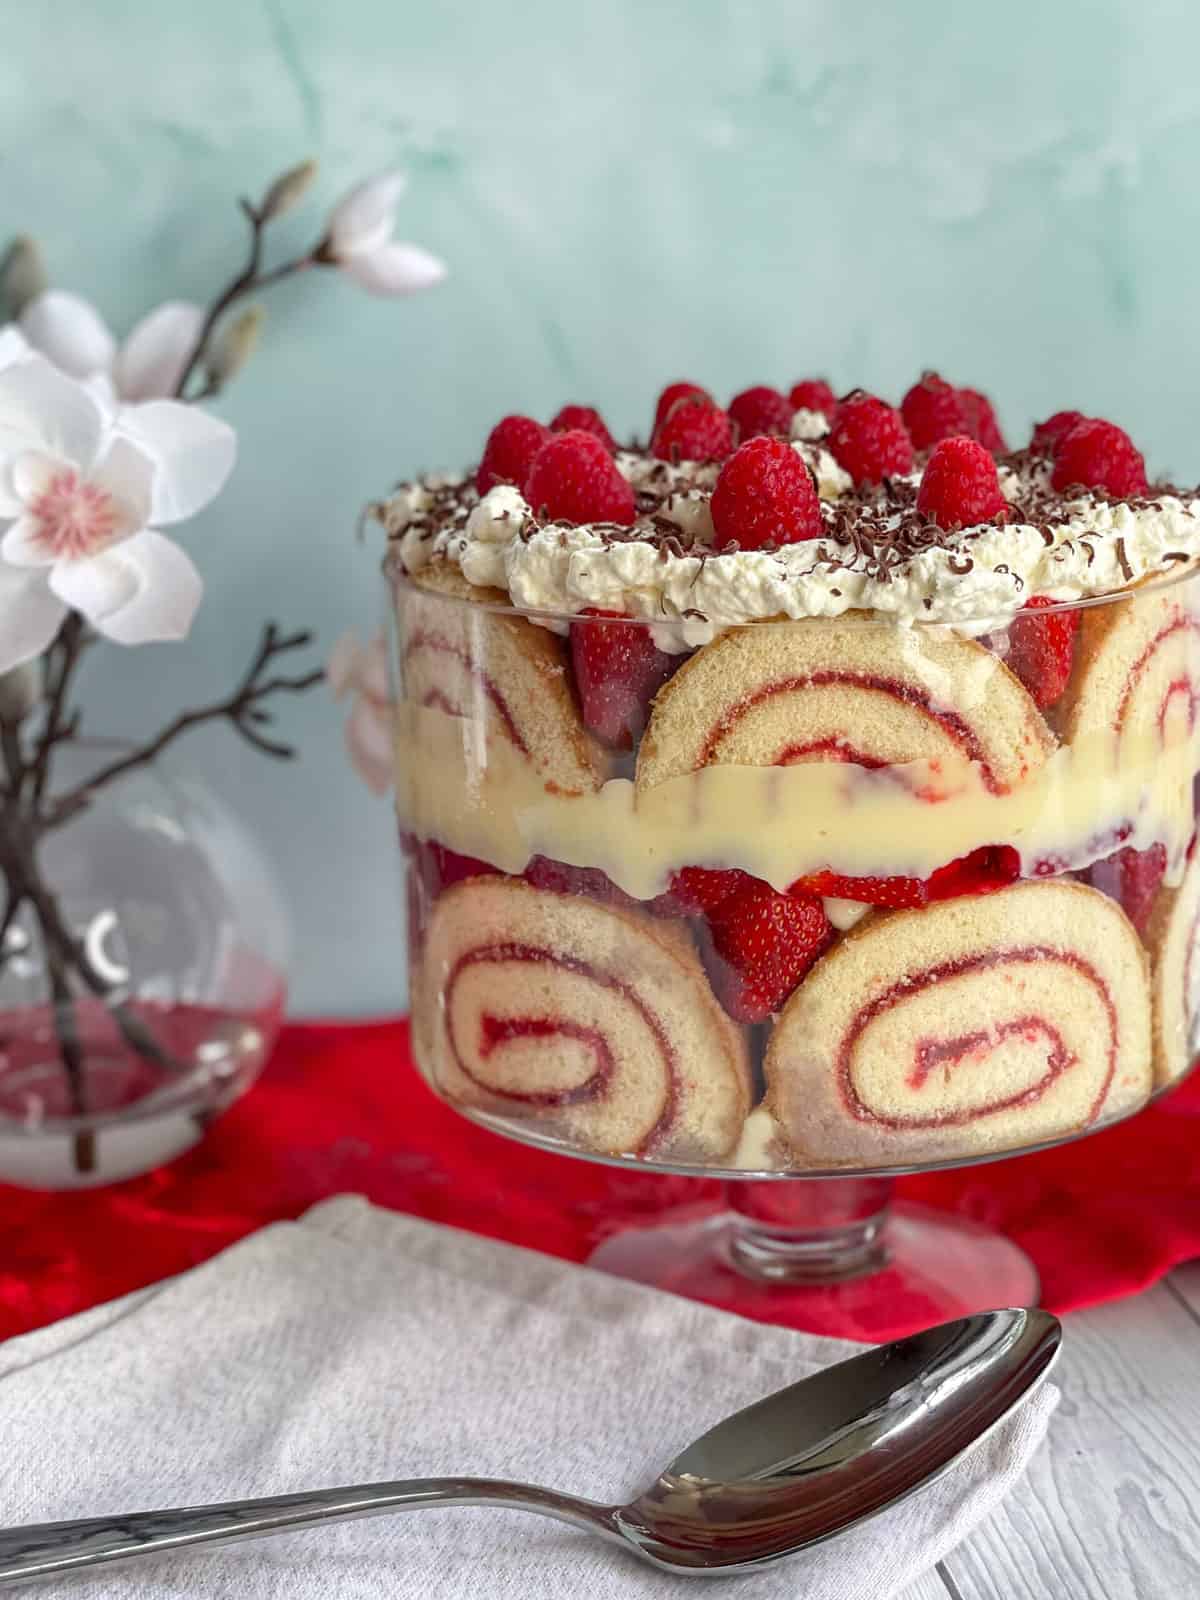 Large classic trifle with berries and sponge roll and a large silver serving spoon